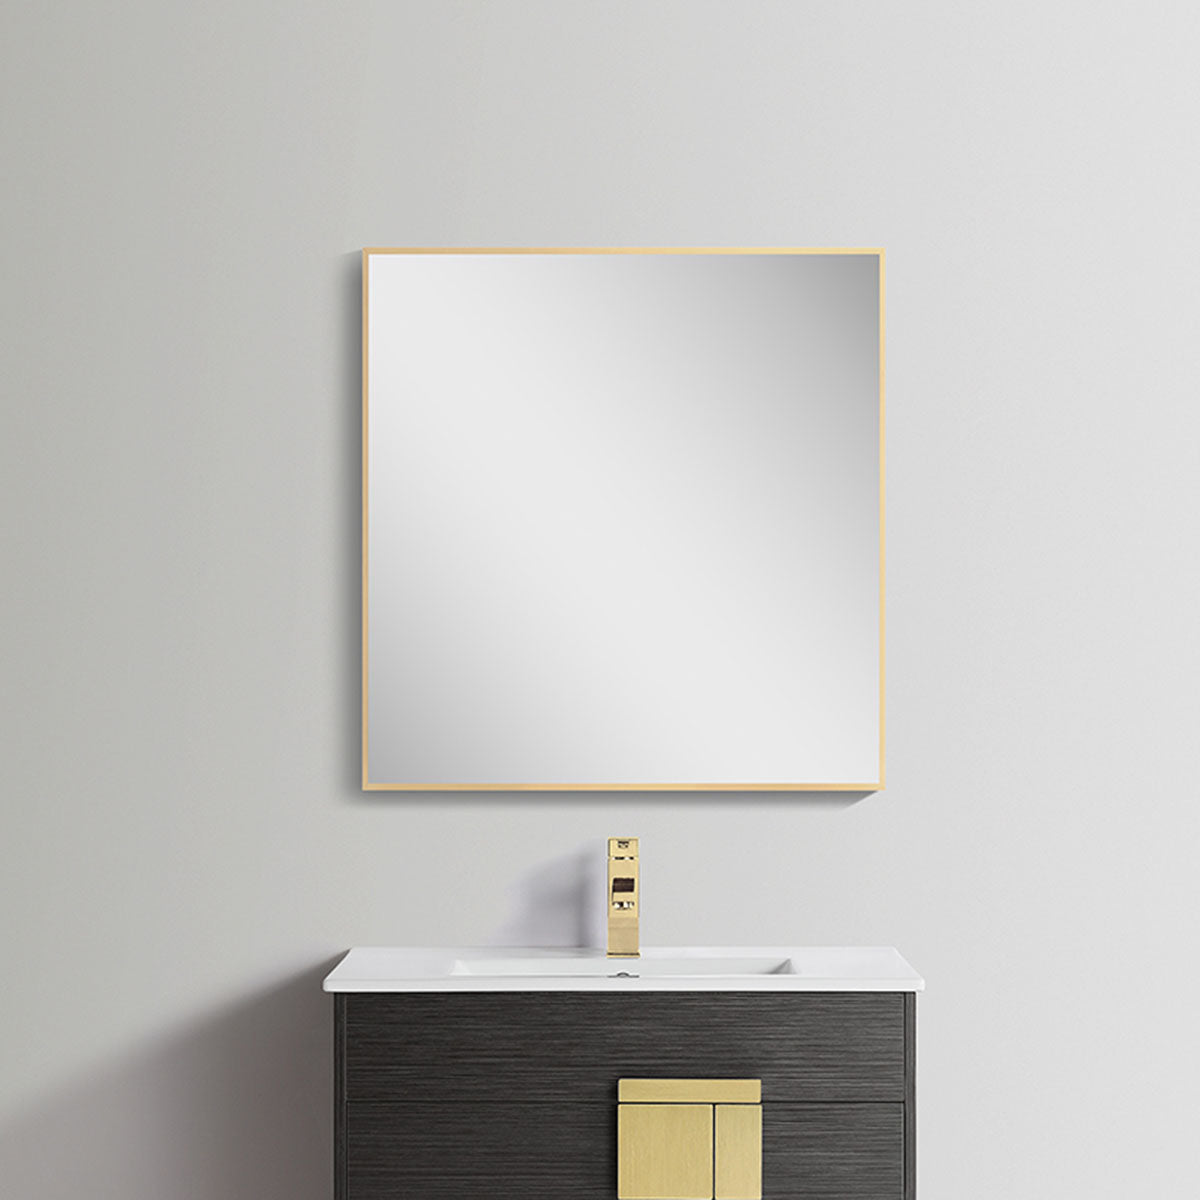 30"w x 32"h Aluminum Rectangle Bathroom Wall Mirror (Brushed Gold) - iStyle Bath